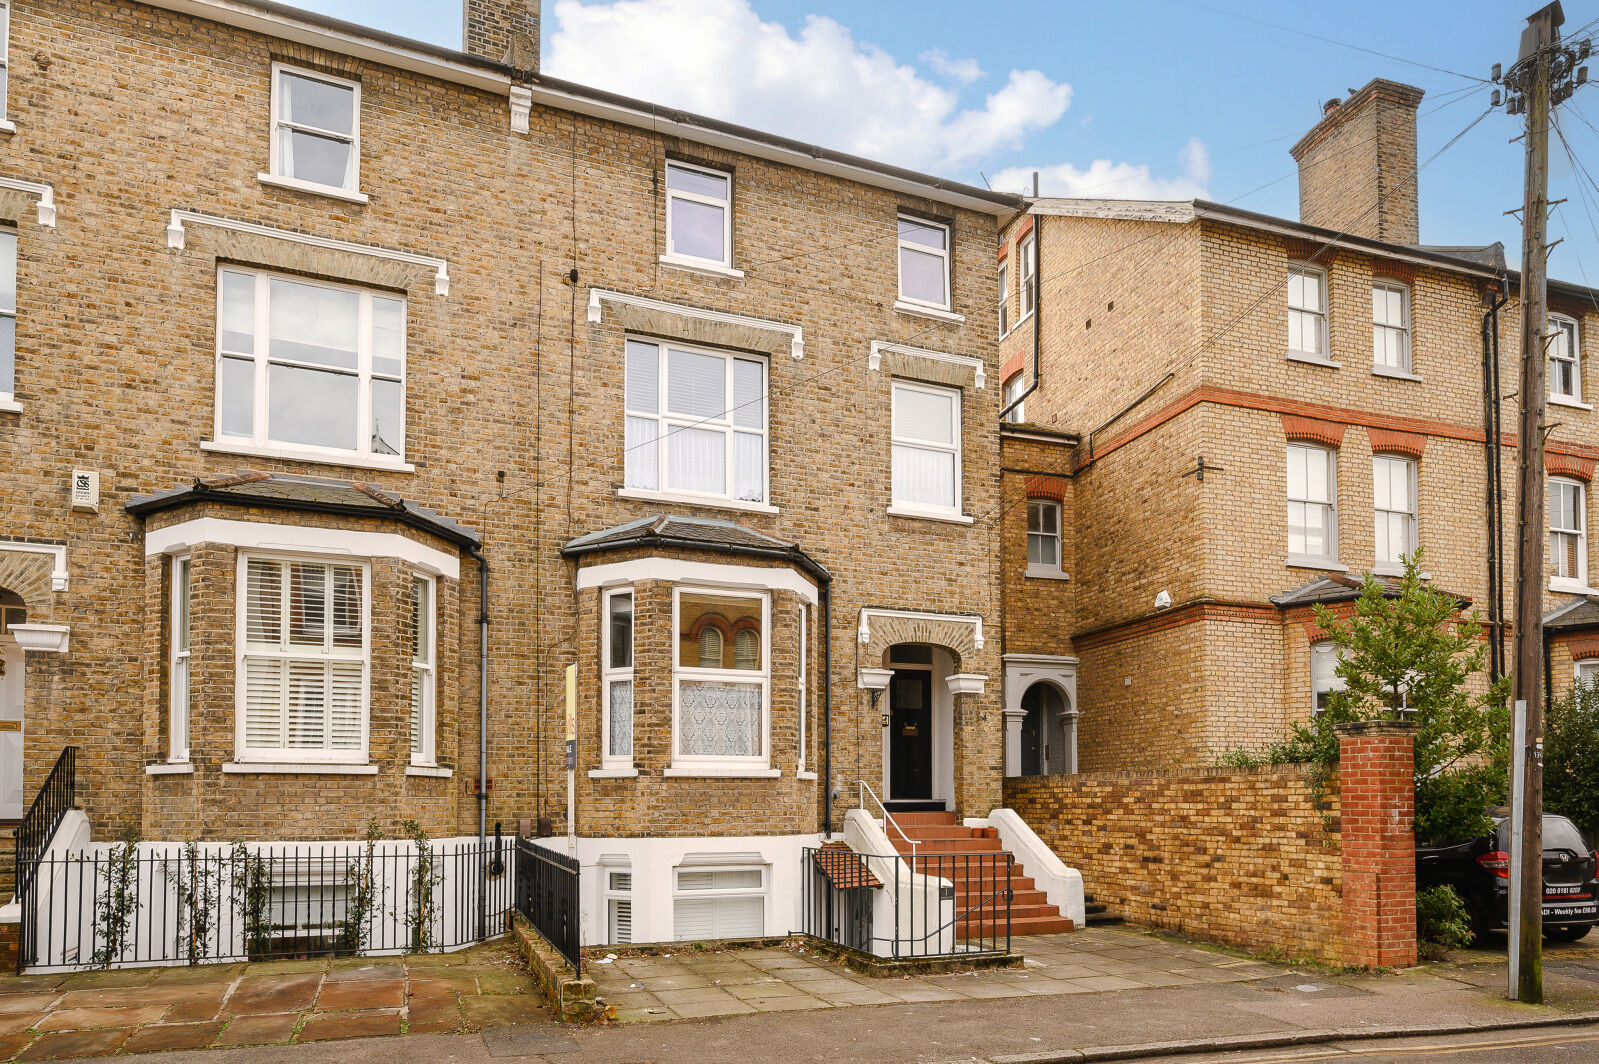 2 bedroom  flat for sale Homefield Road, Wimbledon, SW19, main image